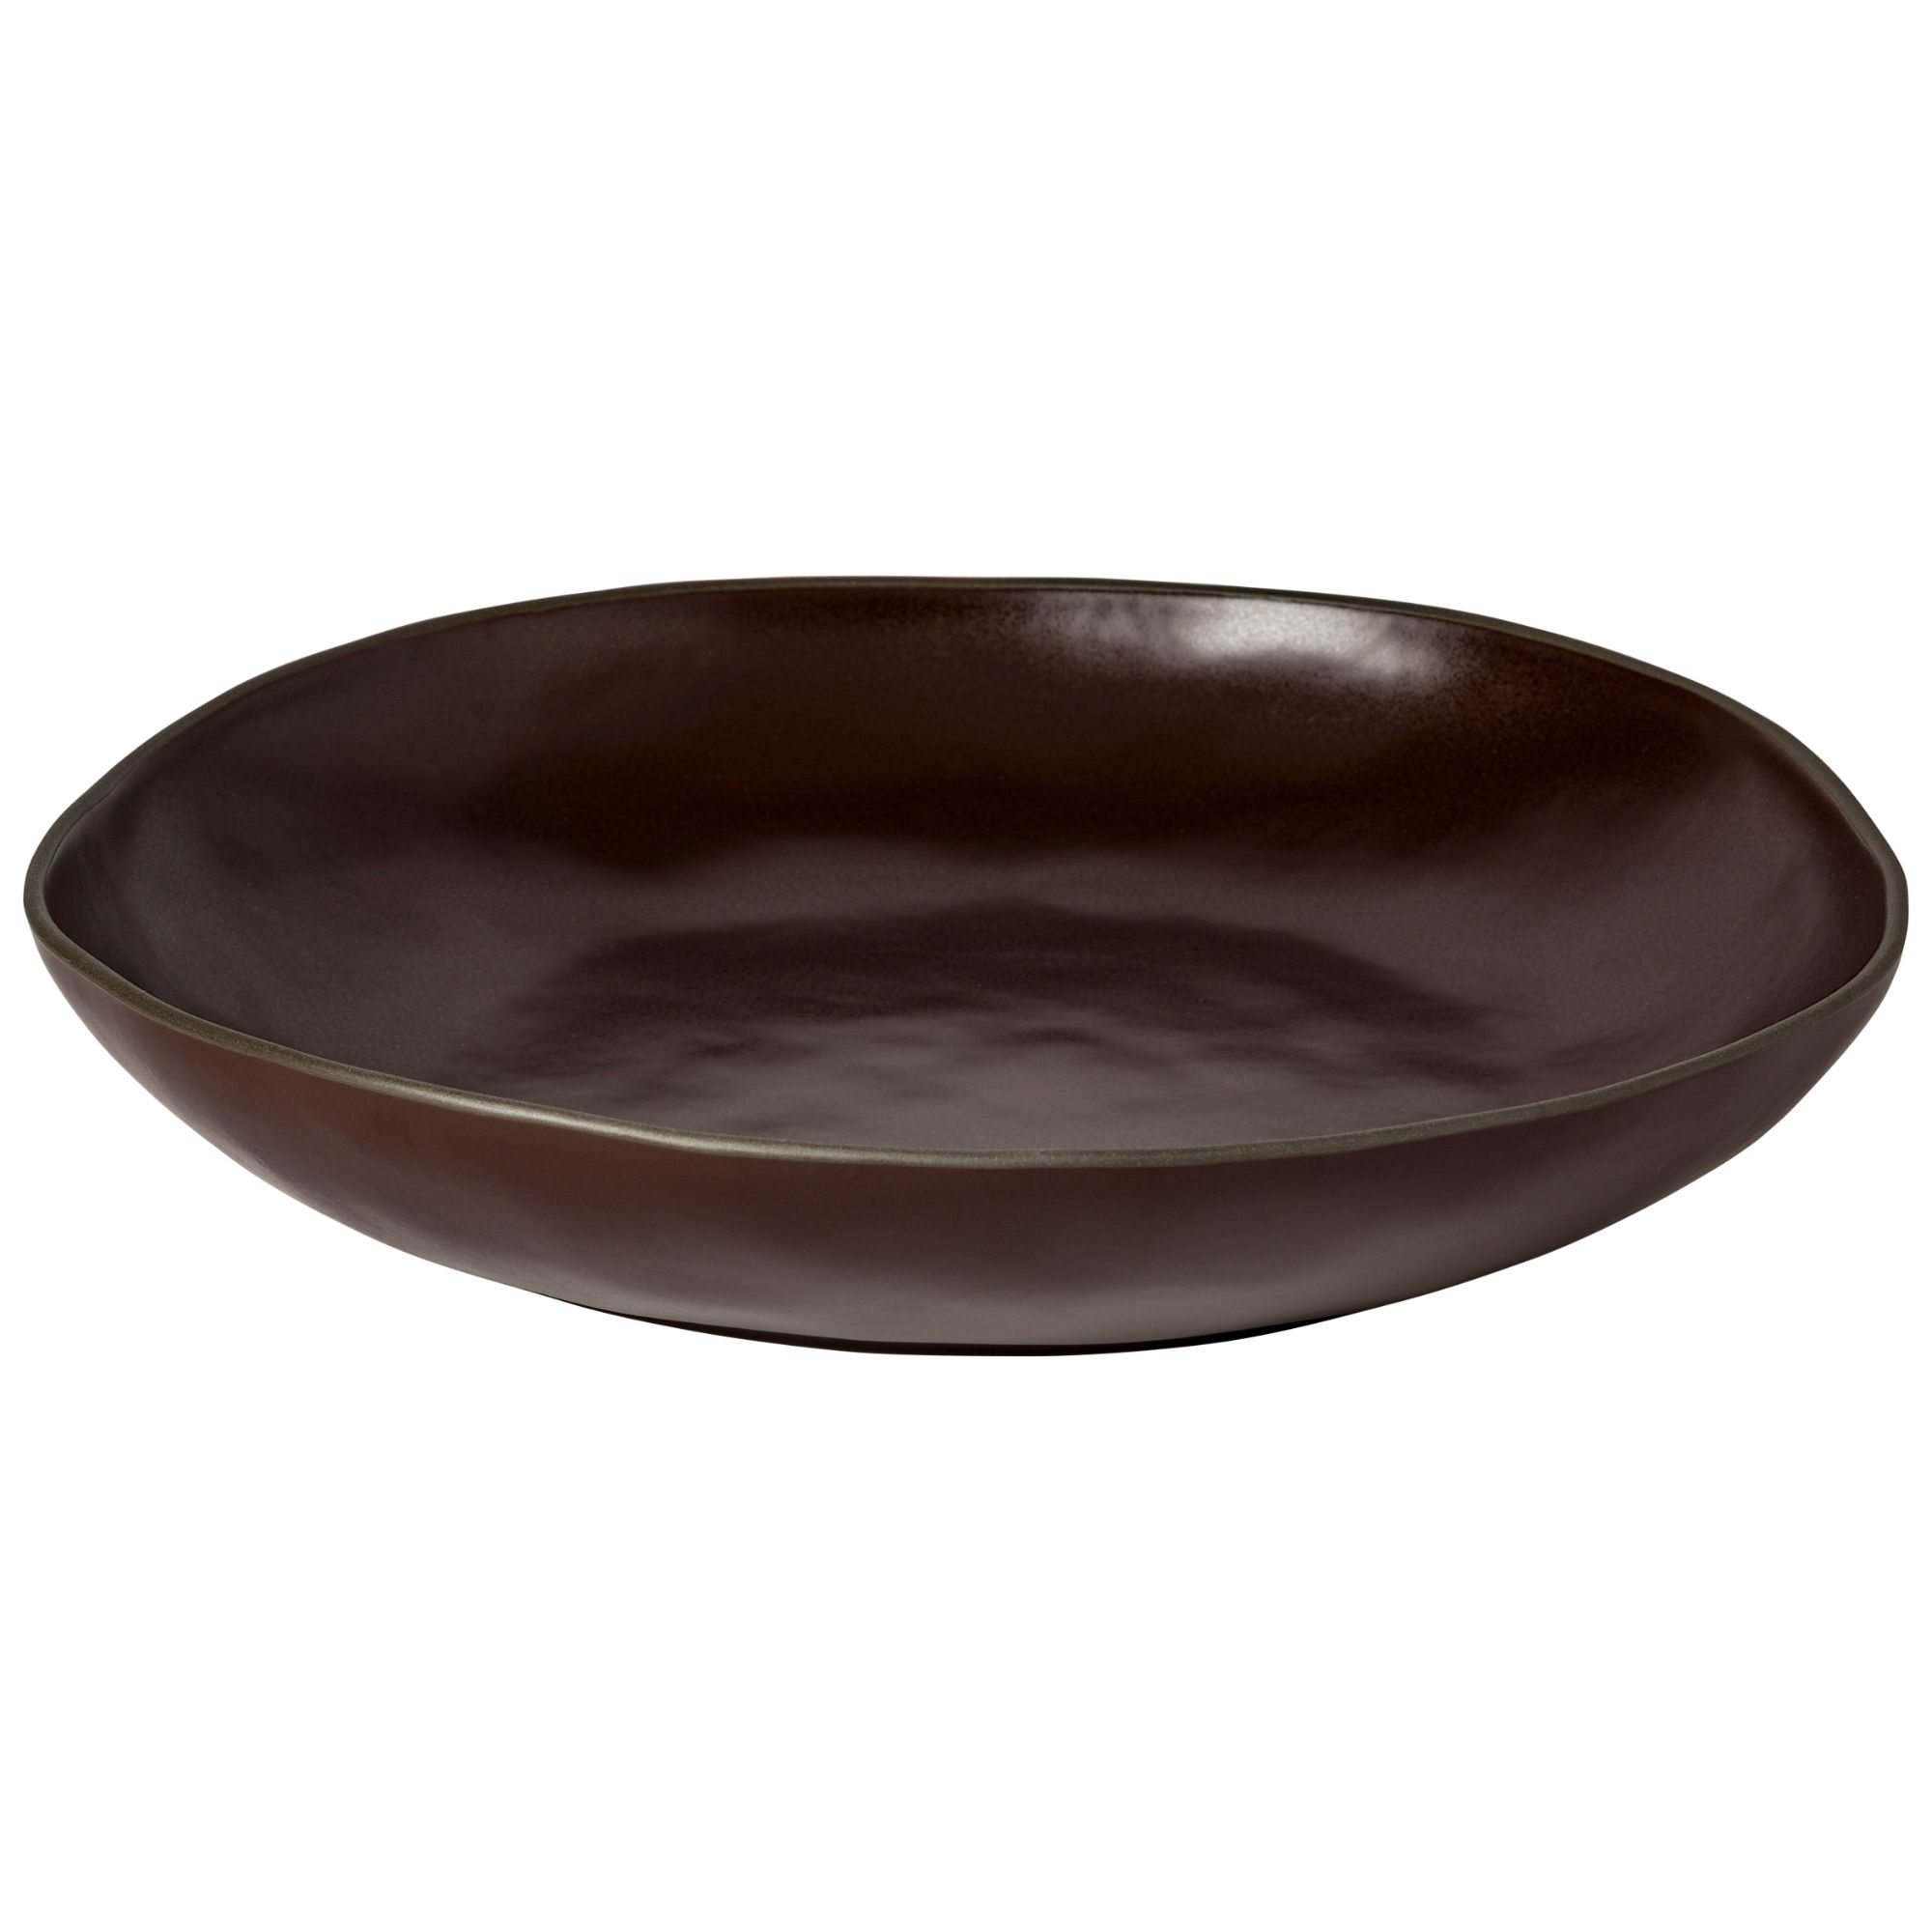 Stacked Organic Port Serving Bowl 37cm Gift